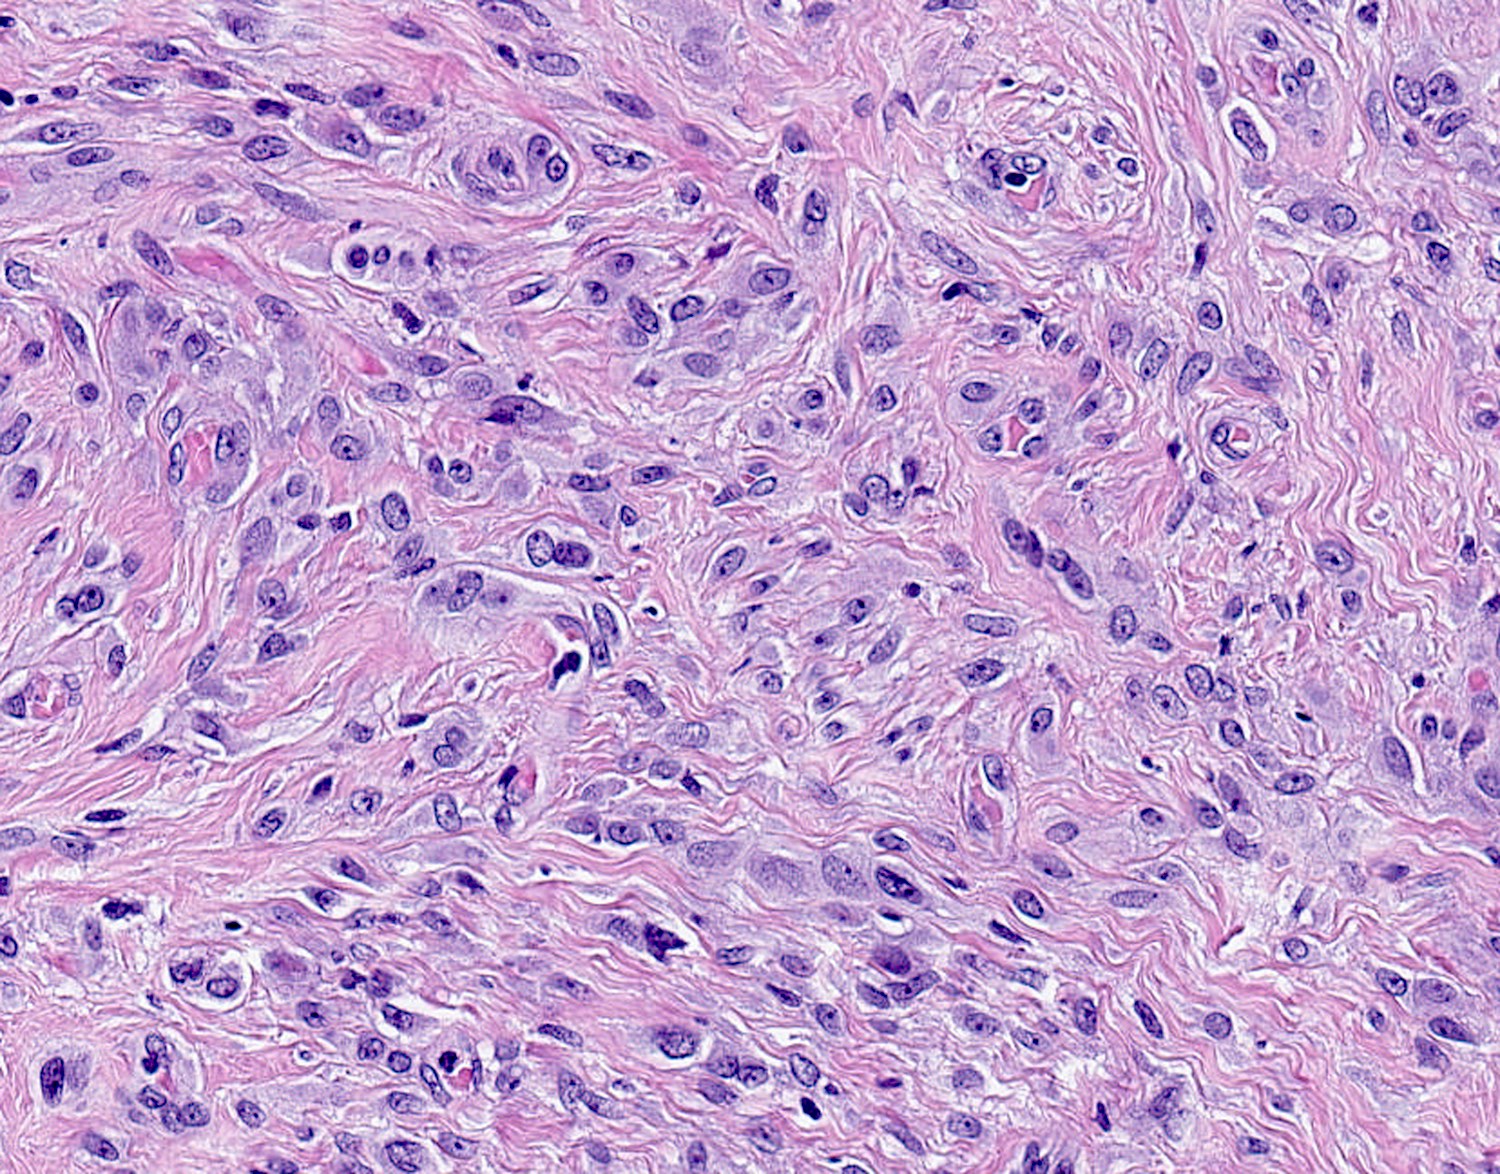 Epithelioid with single file growth